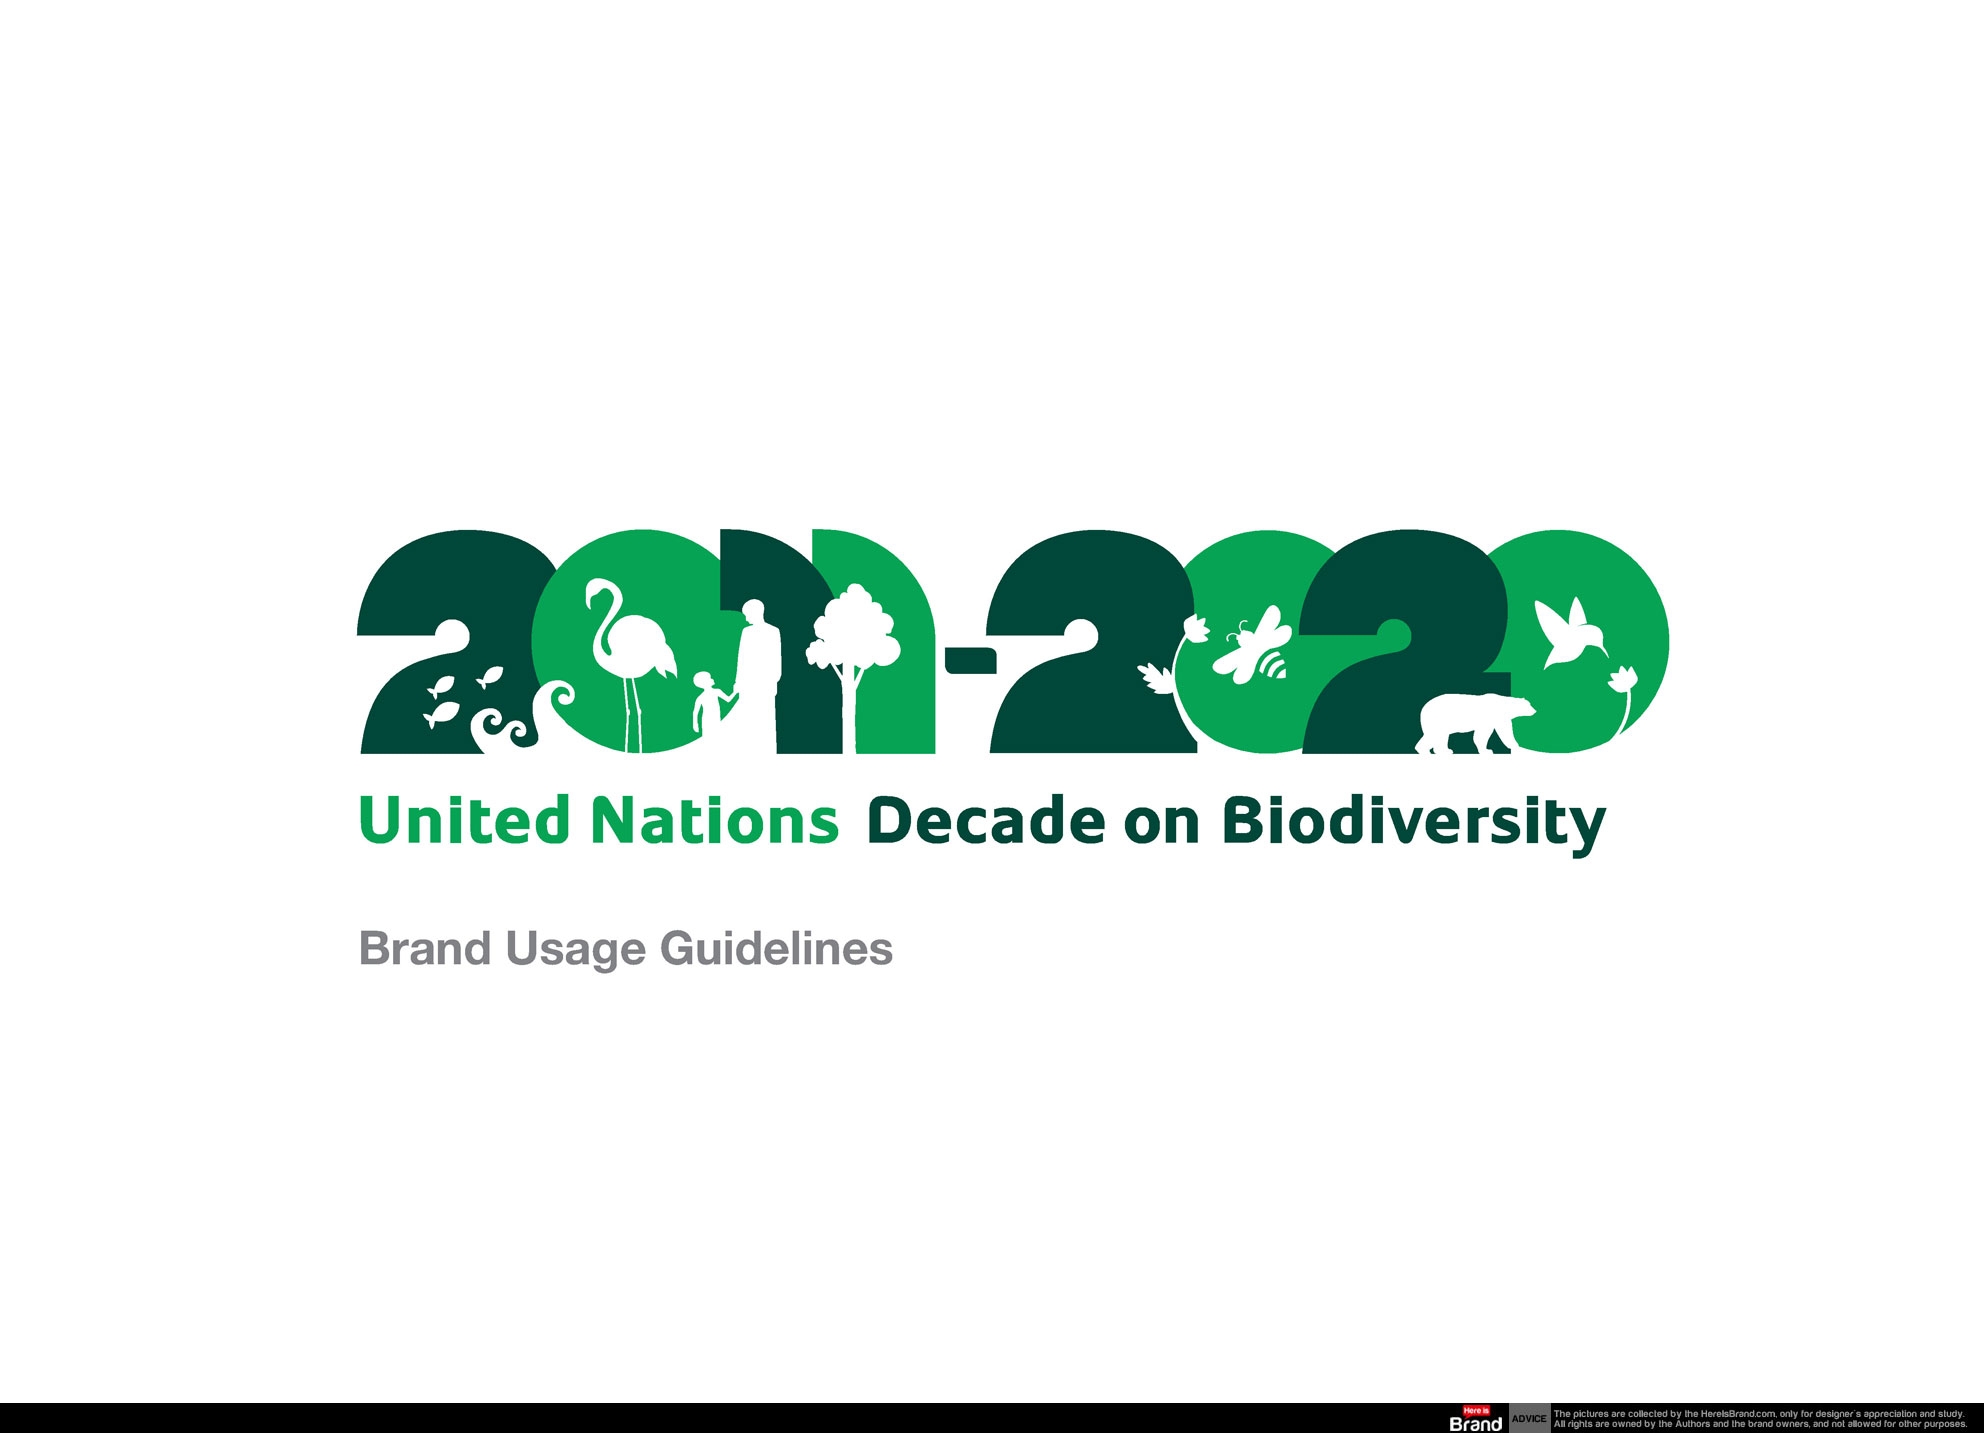 2011-2020 United Nations Decade on Biodiversity brand usage guidelines